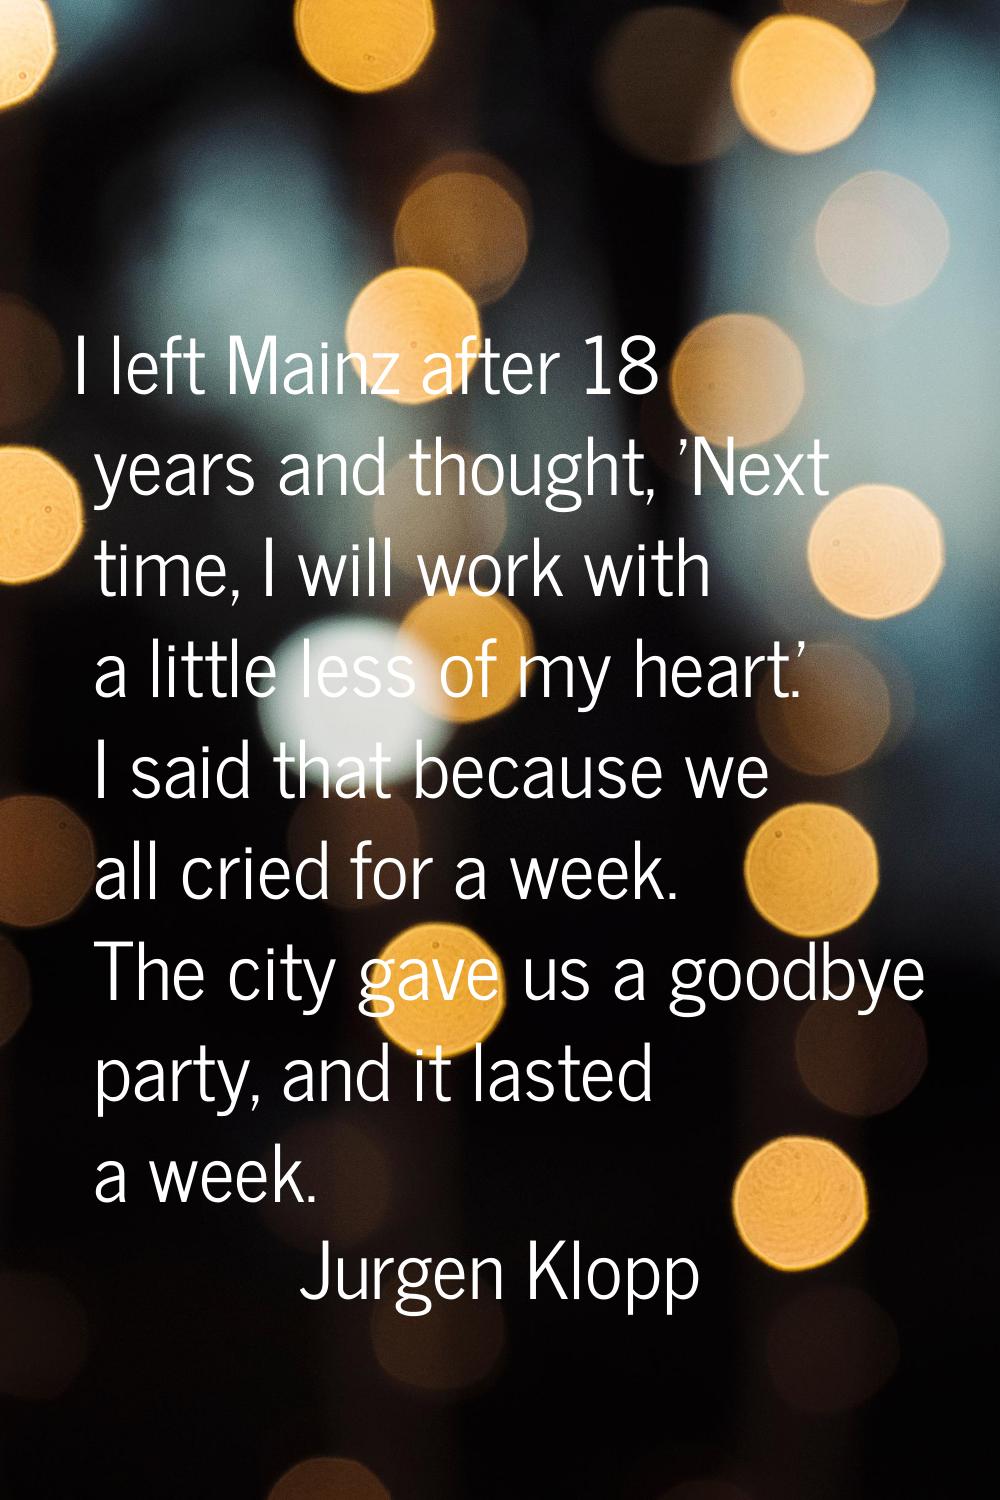 I left Mainz after 18 years and thought, 'Next time, I will work with a little less of my heart.' I